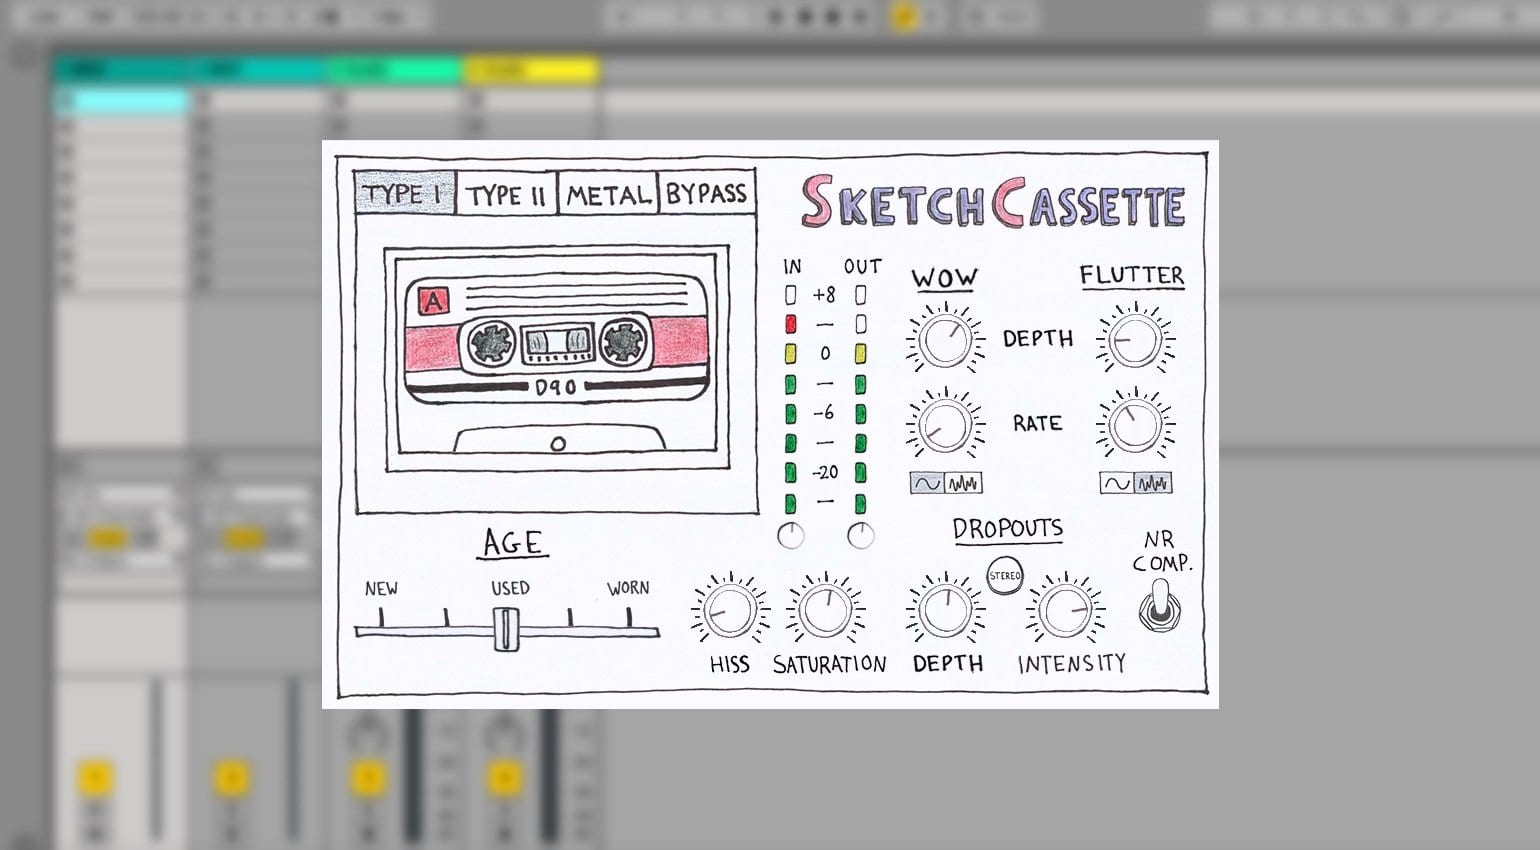 Sketch Cassette  Promised myself I wasnt going to buy anything this  blackfridaybut then I saw this Aberrant DSP Sketch Cassette plugin for  10 and was like why not  By Josh